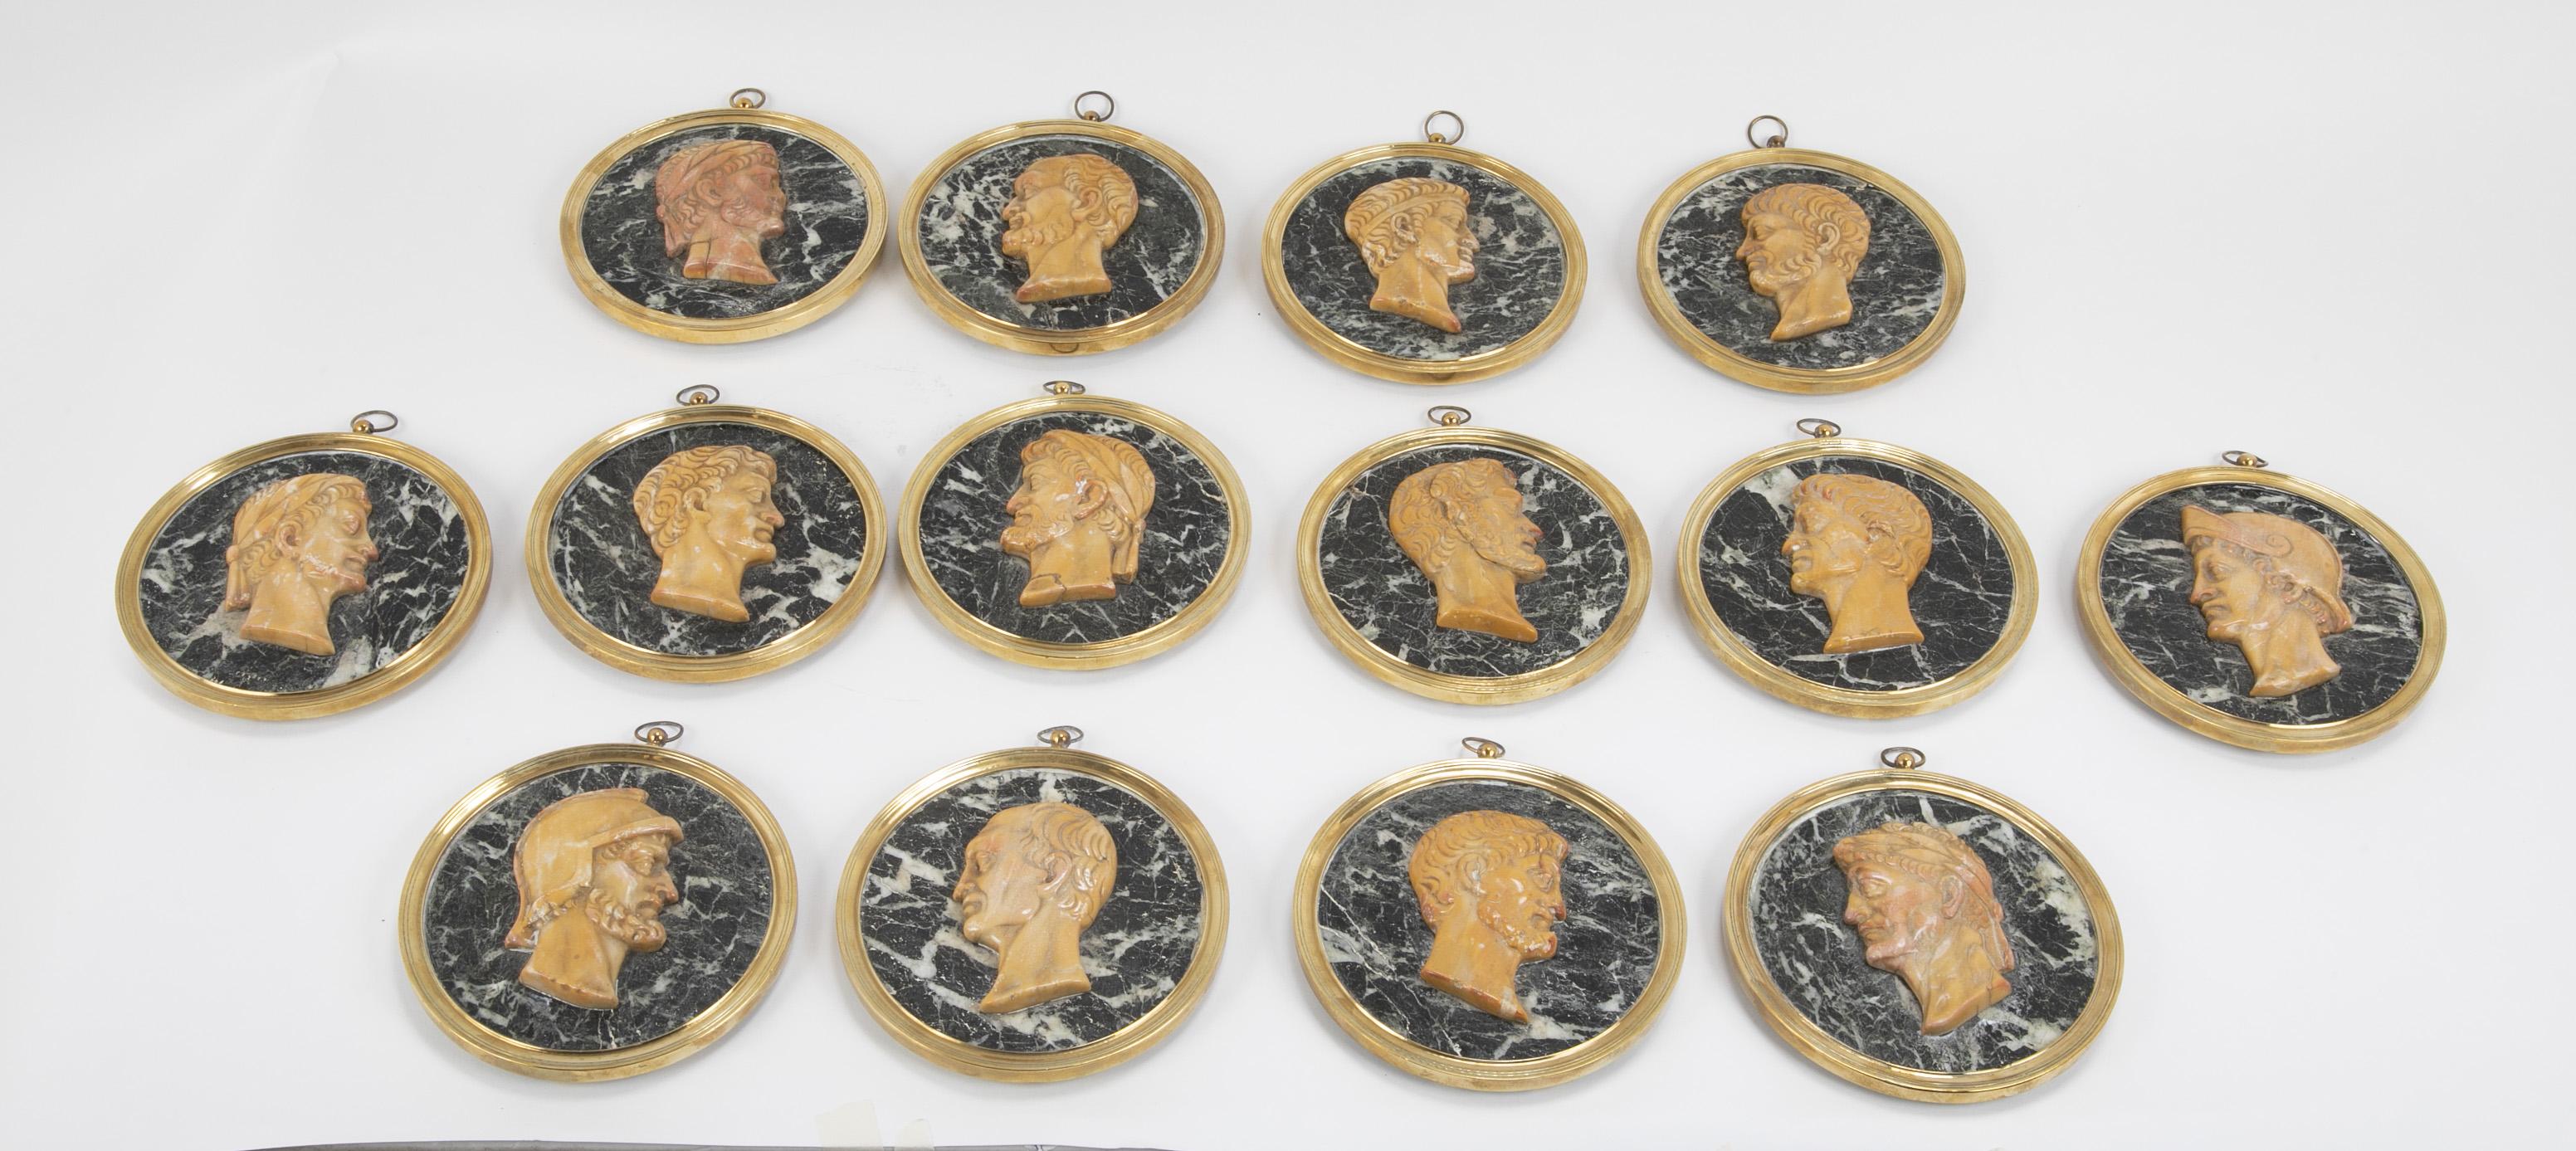 Fourteen portraits of Roman Emperors circa first quarter of the 19th century. Portraits made of Giallo di Siena marble on Verde Antiqtico Marble with later brass handmade frames.